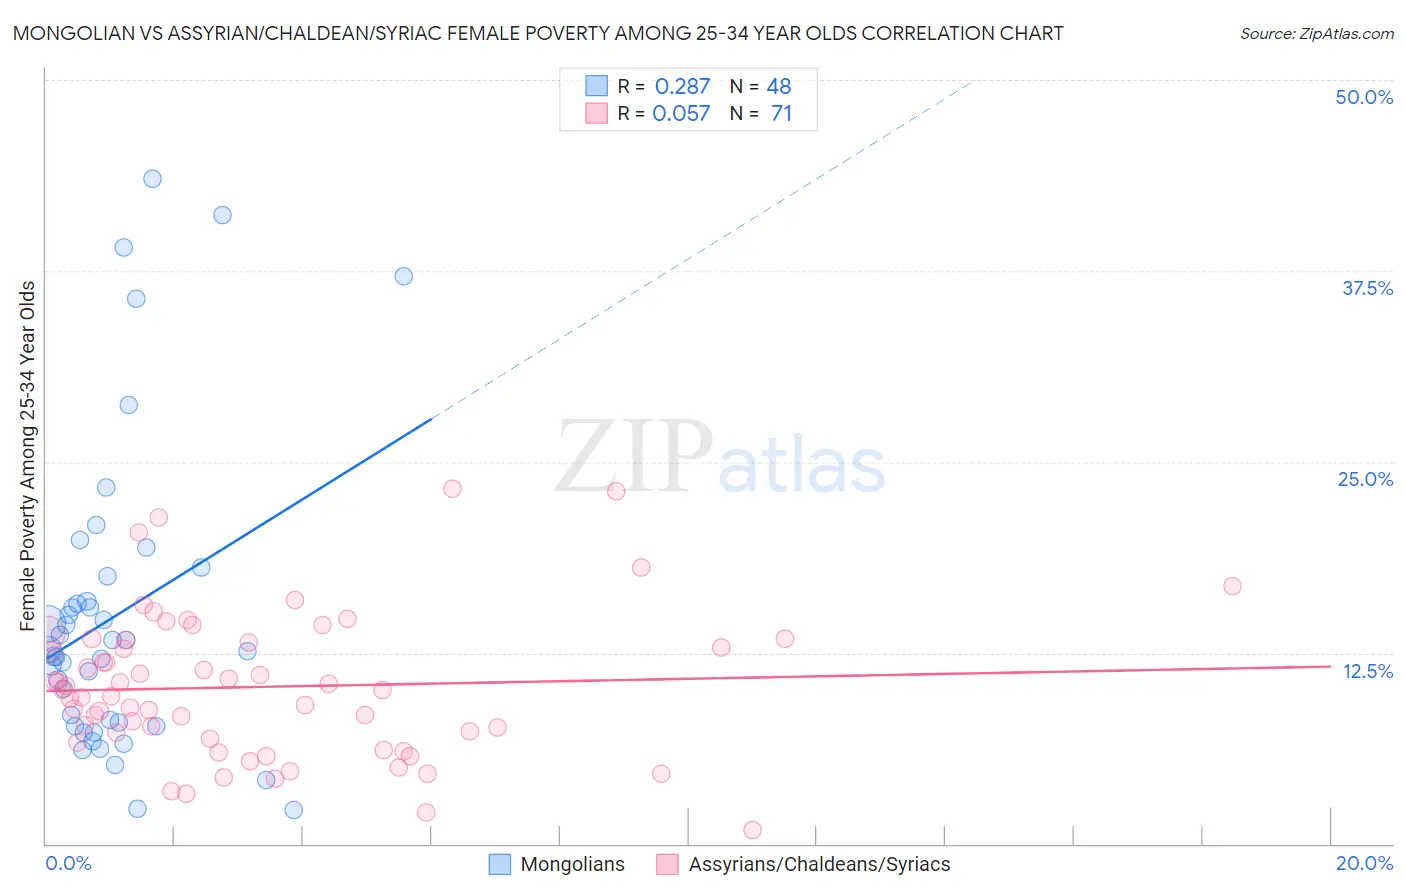 Mongolian vs Assyrian/Chaldean/Syriac Female Poverty Among 25-34 Year Olds